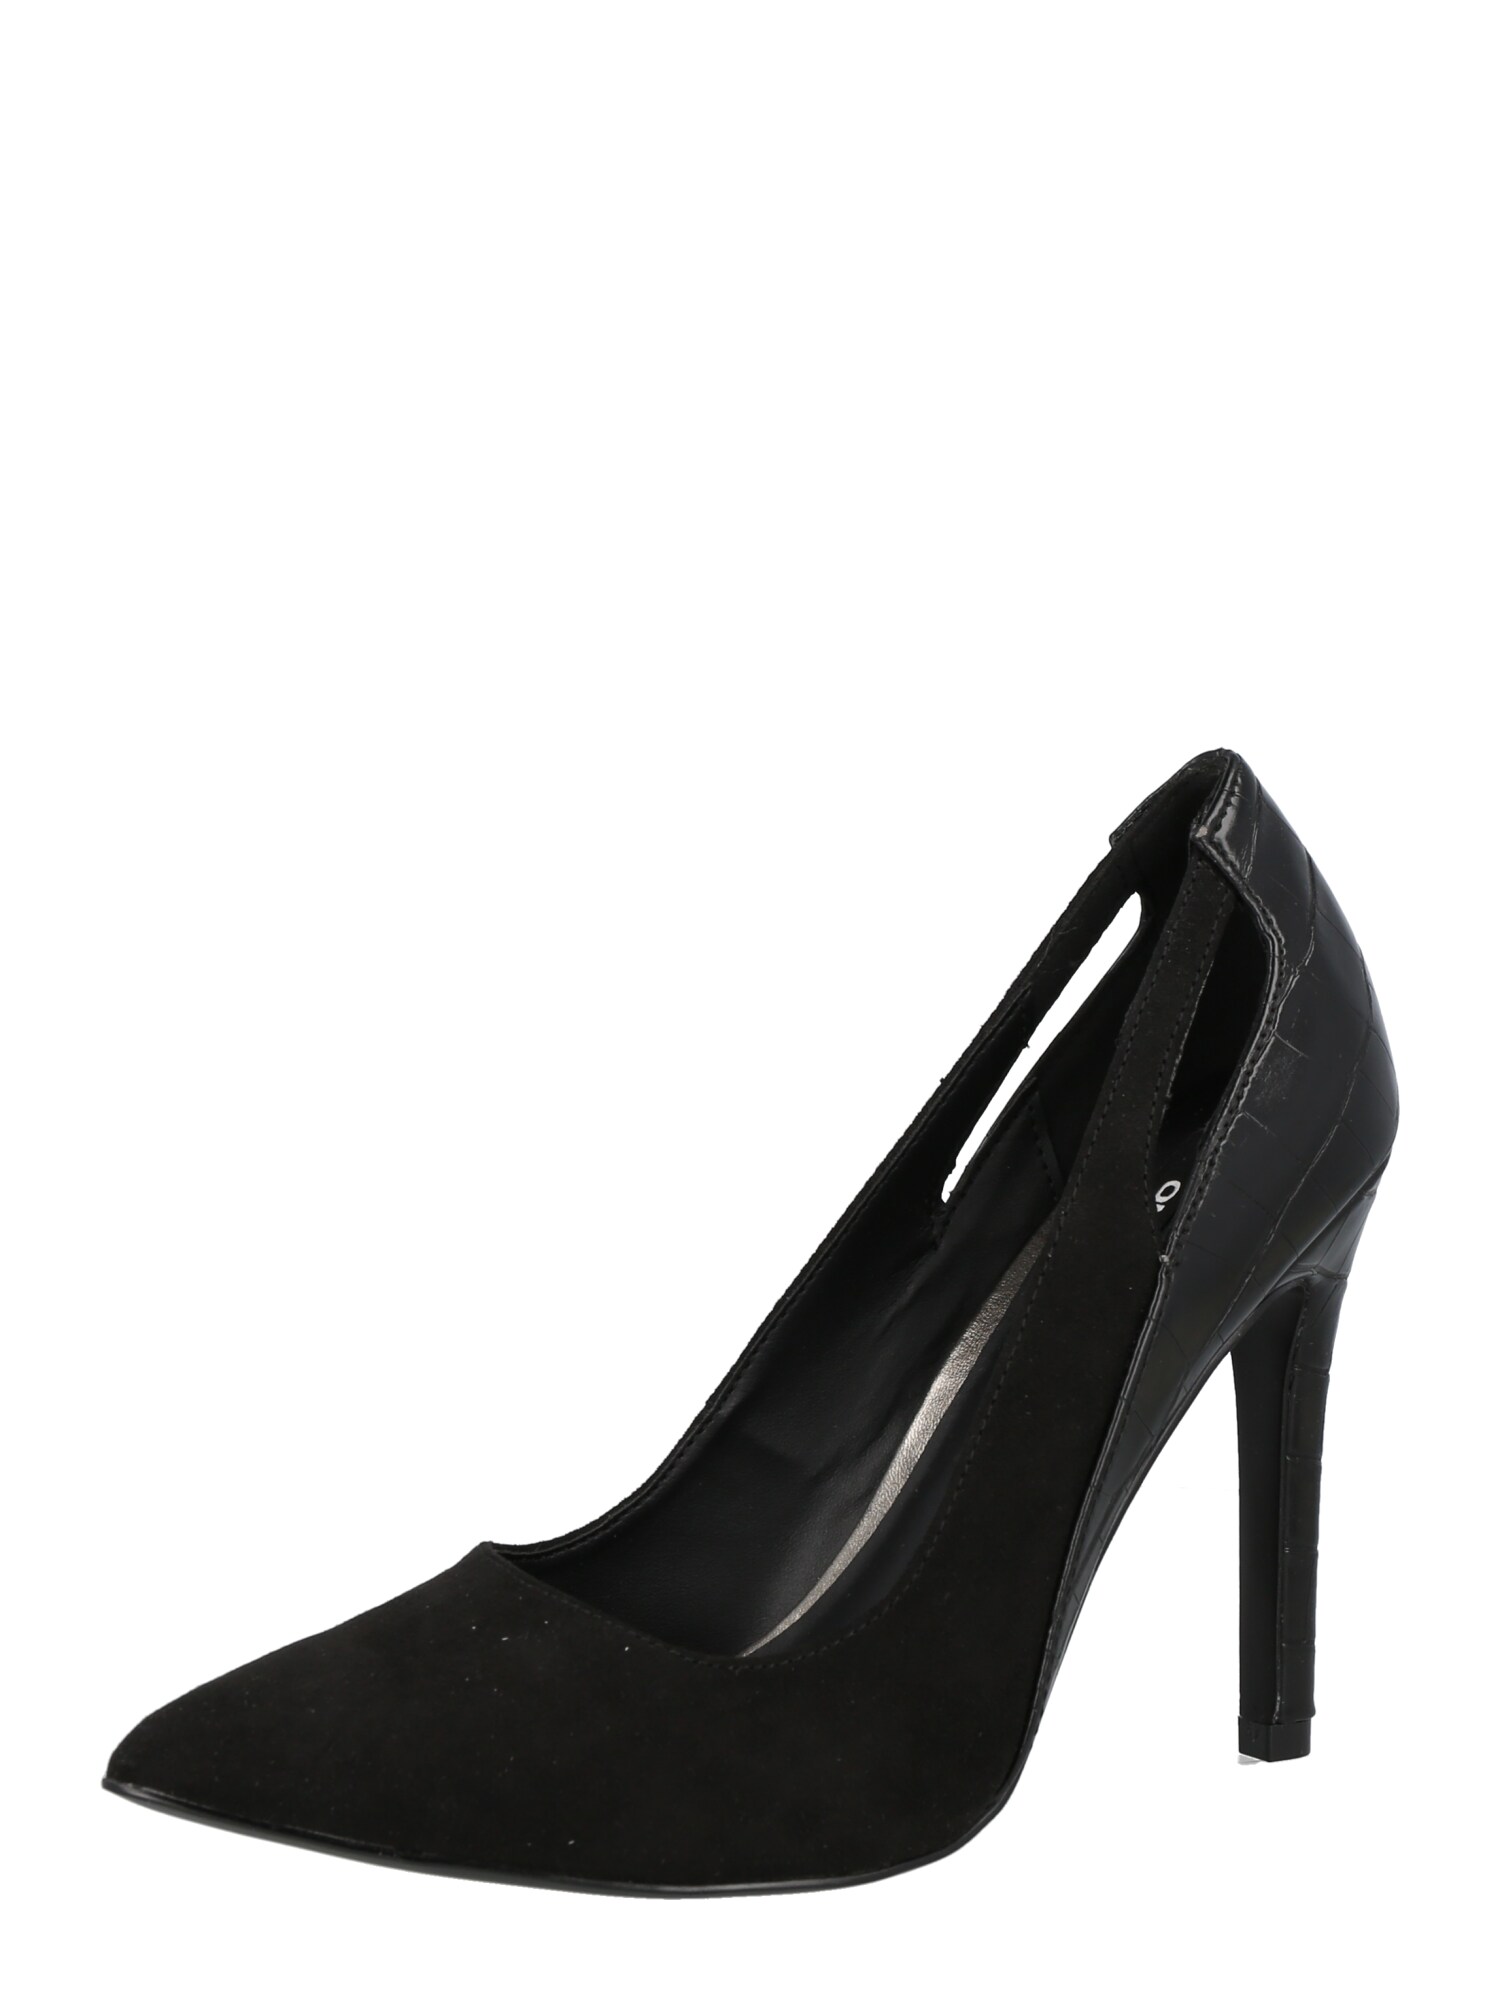 About You: Pumps "Chloe"